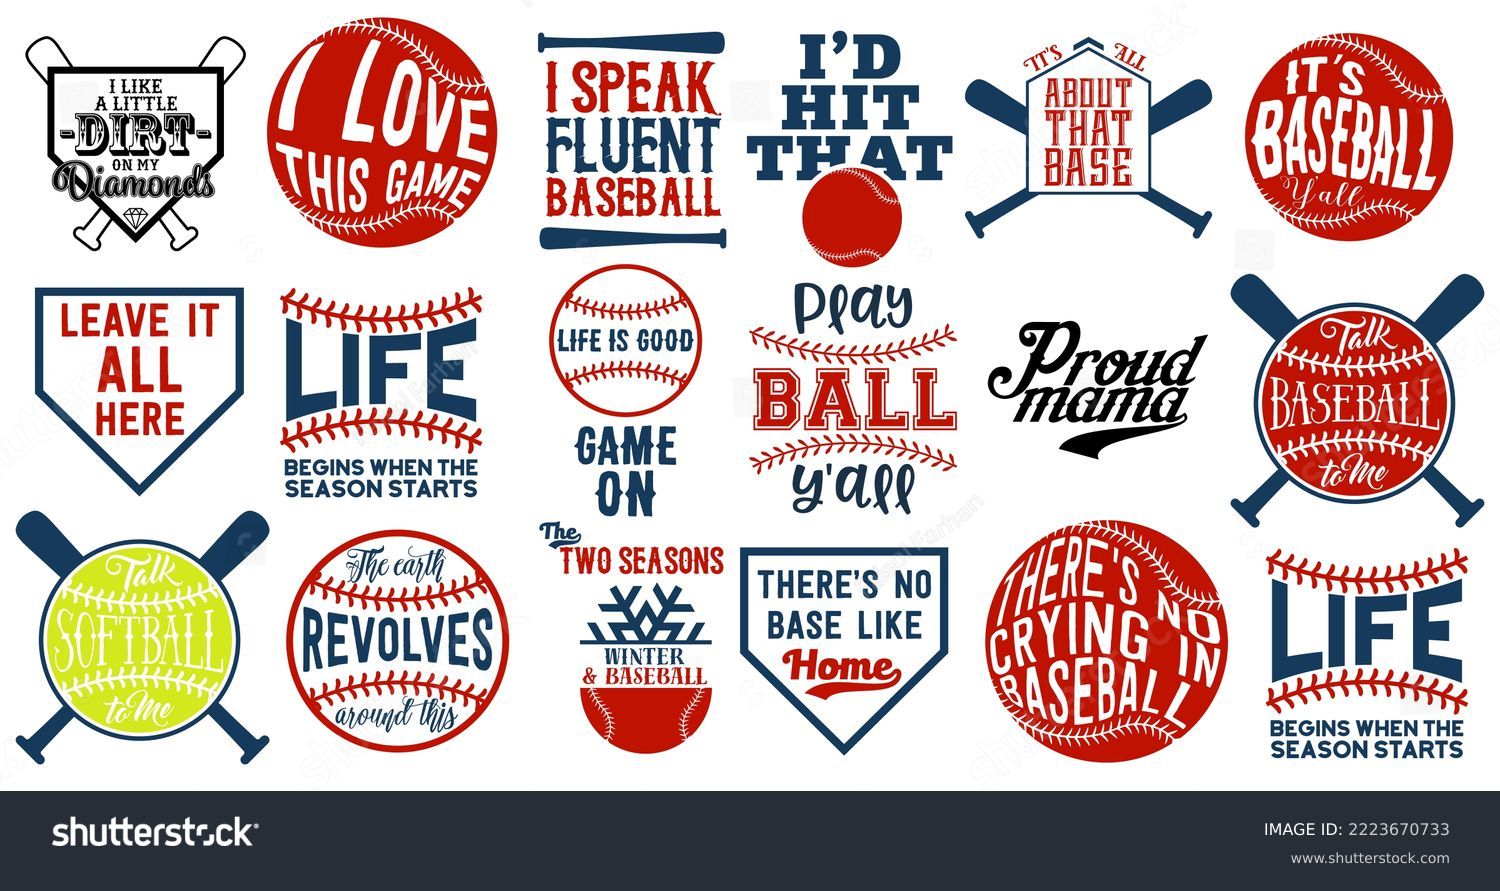 SVG of Baseball Quote Bundle, illustrations for posters, decoration, t-shirt design. Hand drawn baseball sketches with motivational typography isolated on white background. Detailed vintage drawing logo. svg